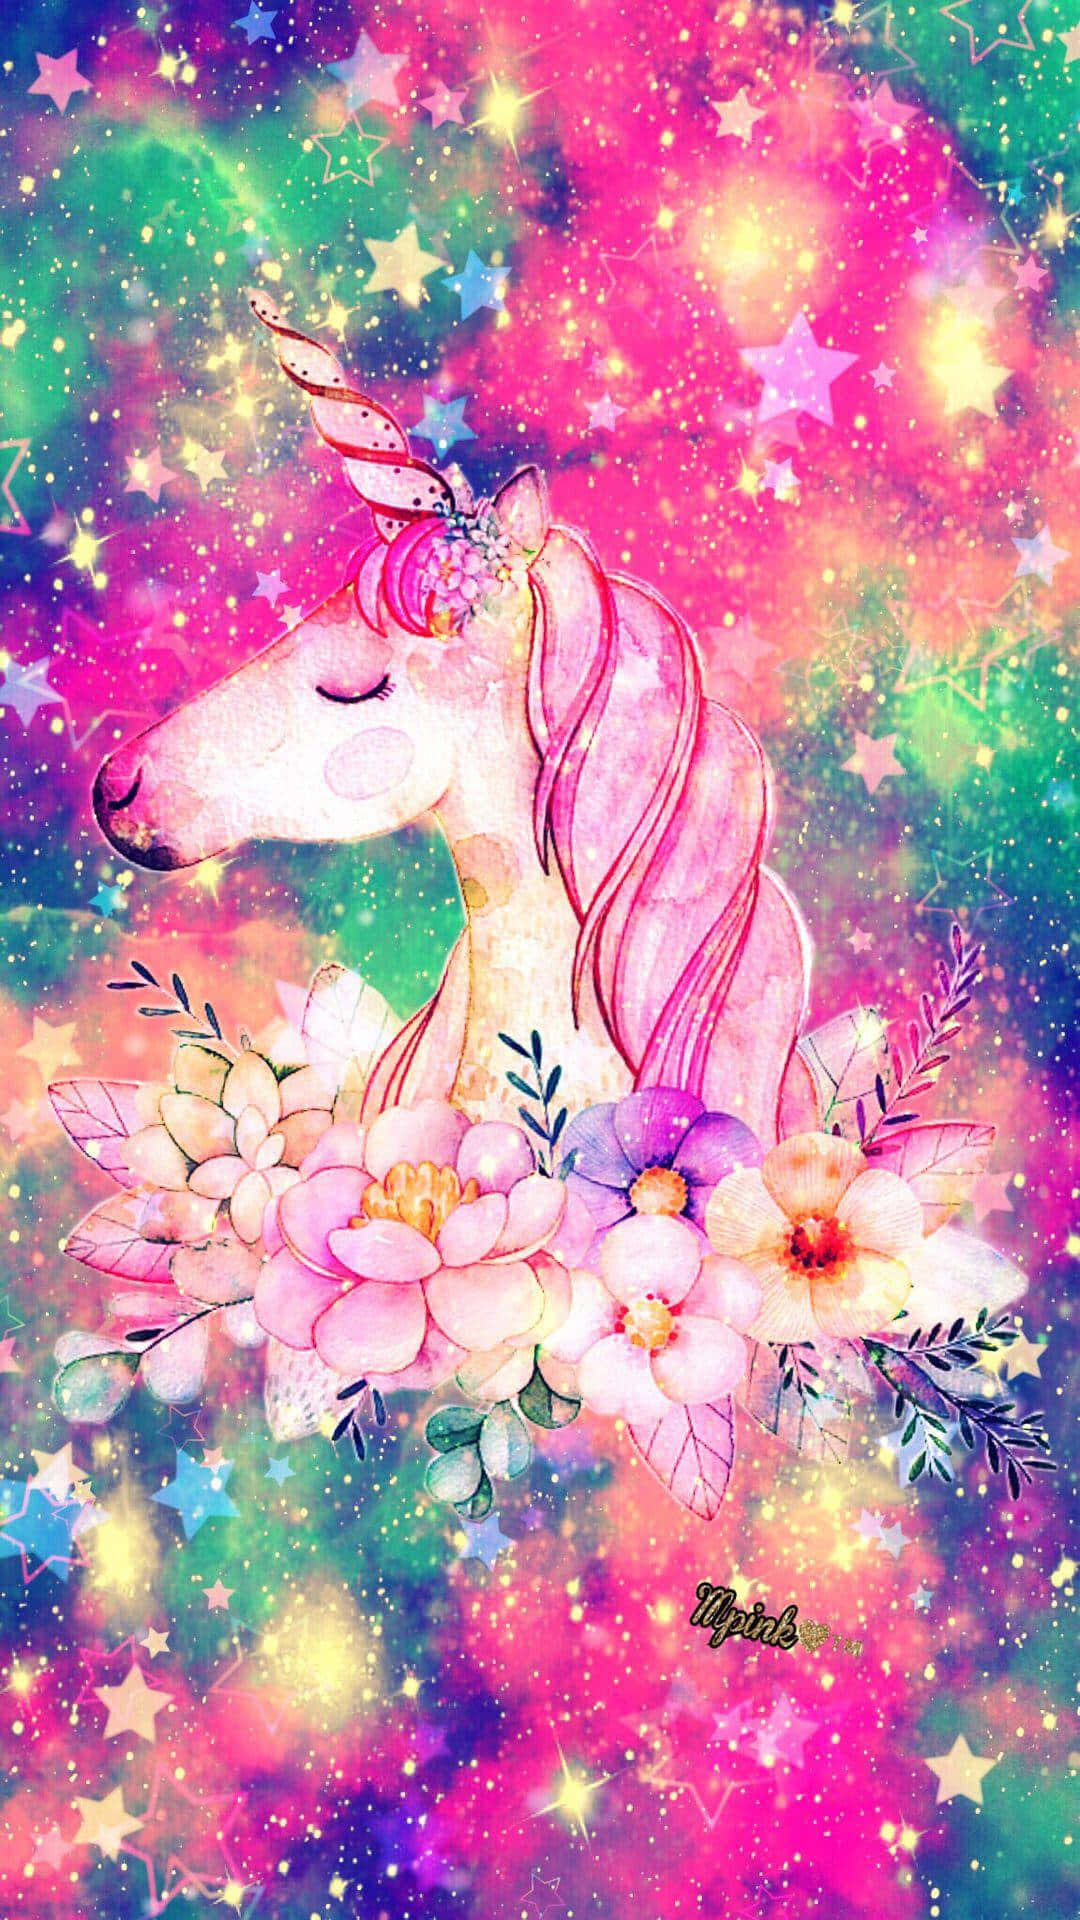 A Unicorn With Stars And Flowers In The Background Wallpaper